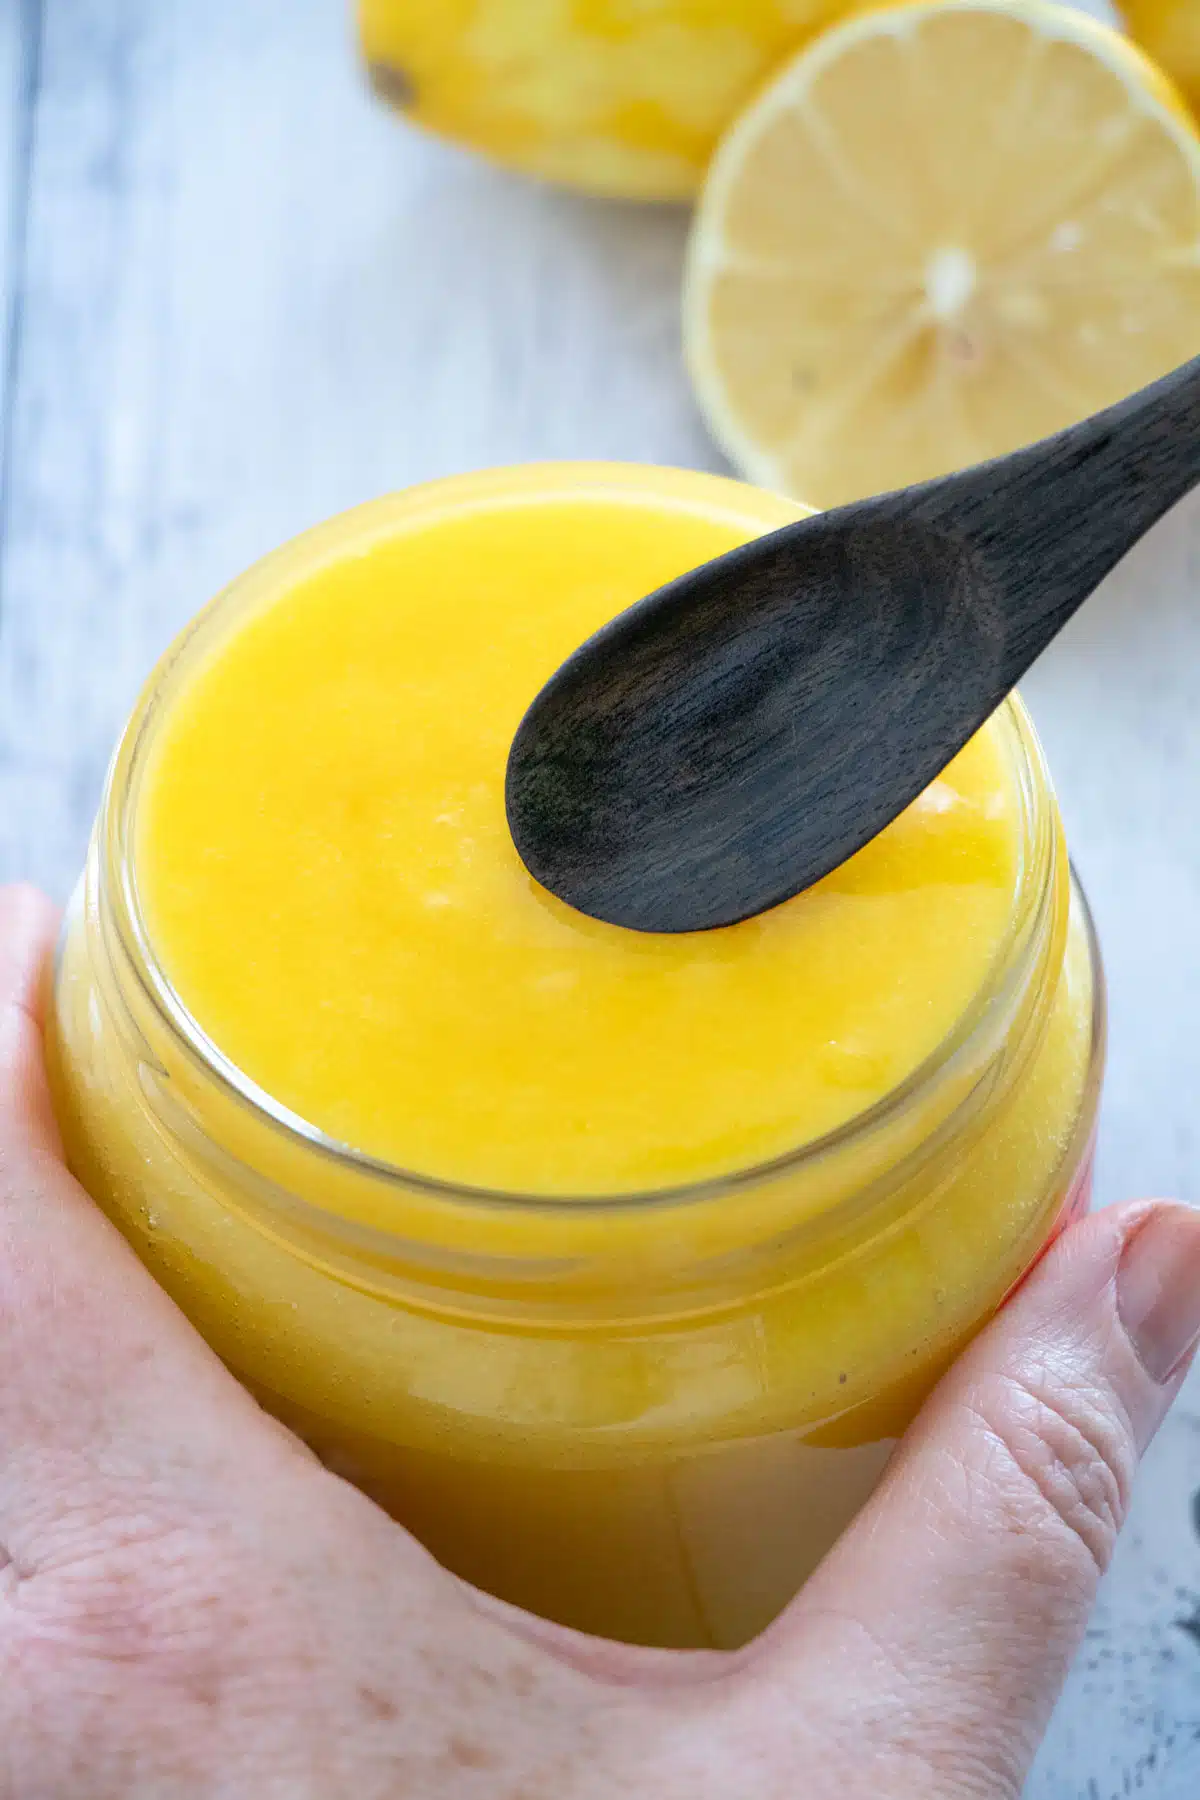 A white hand is holding a small jar of bright yellow, dairy-free lemon curd. A small dark-brown wooden spoon is about to be dipped into it.